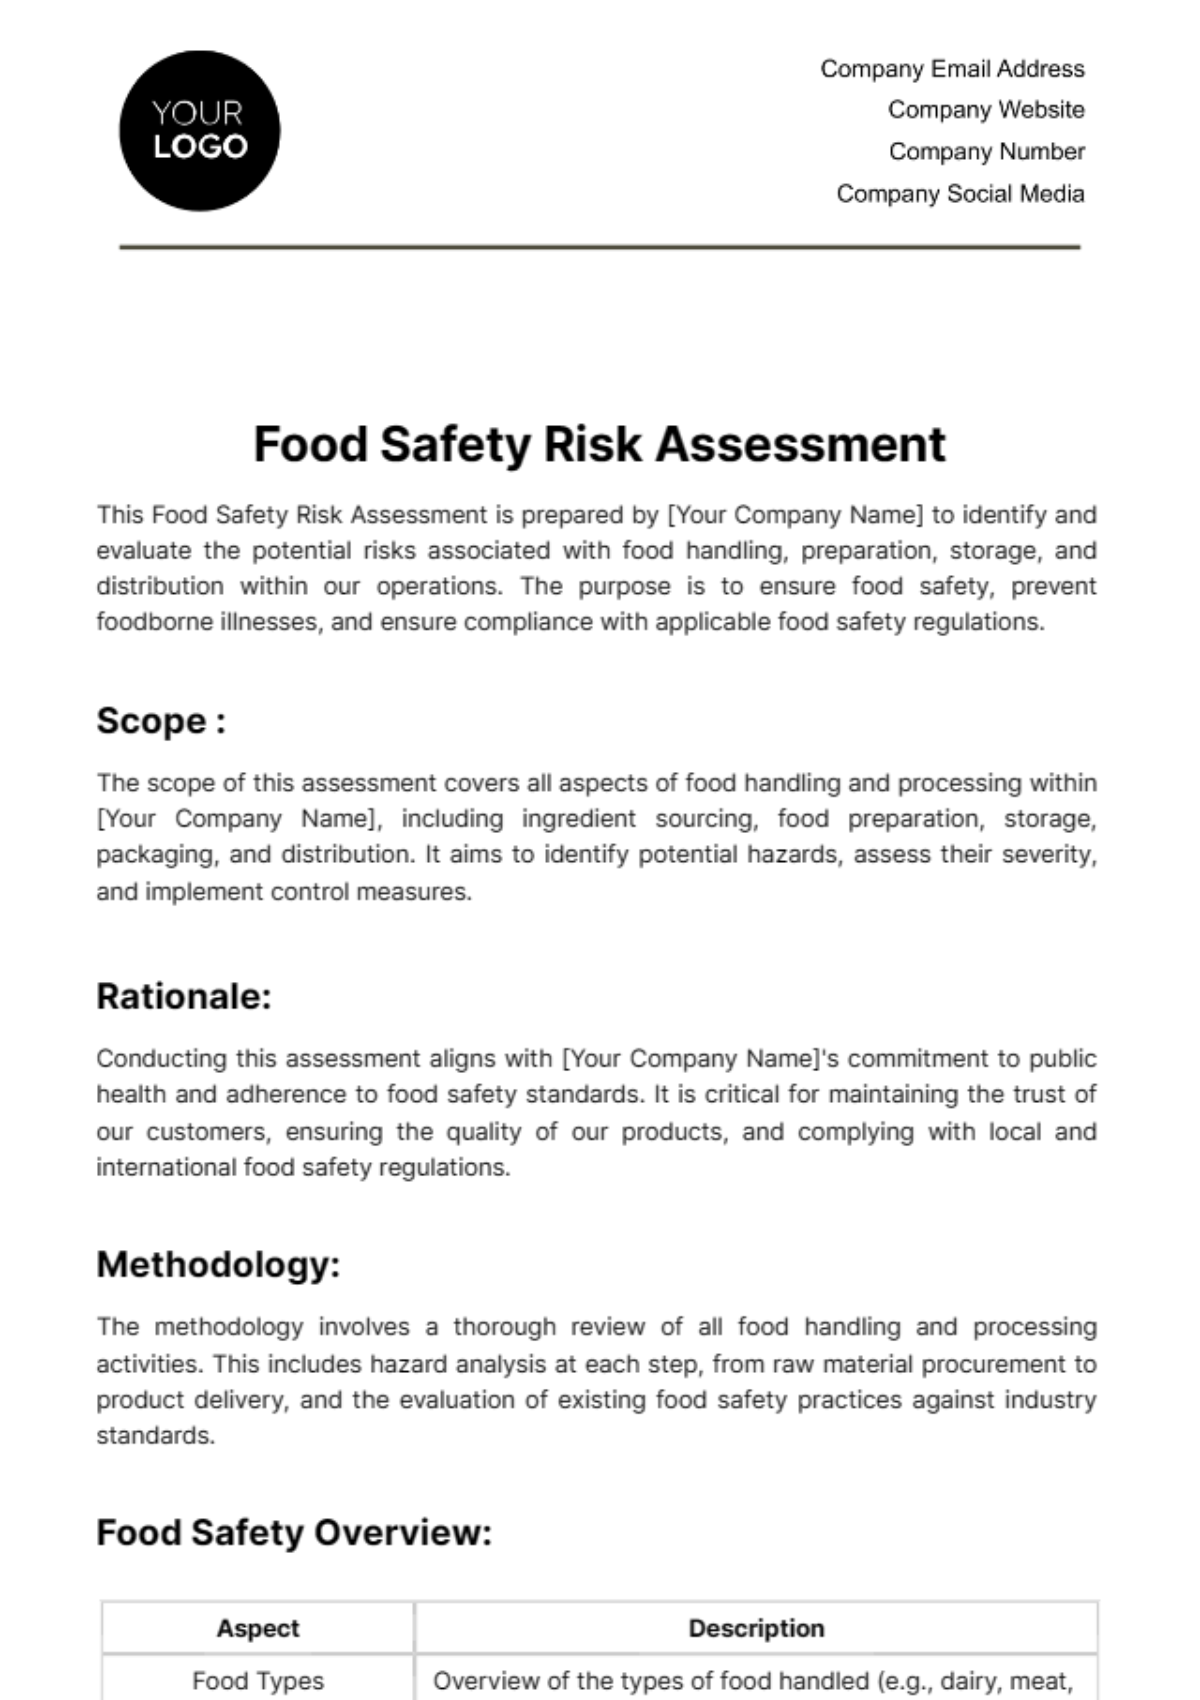 Free Food Safety Risk Assessment Template